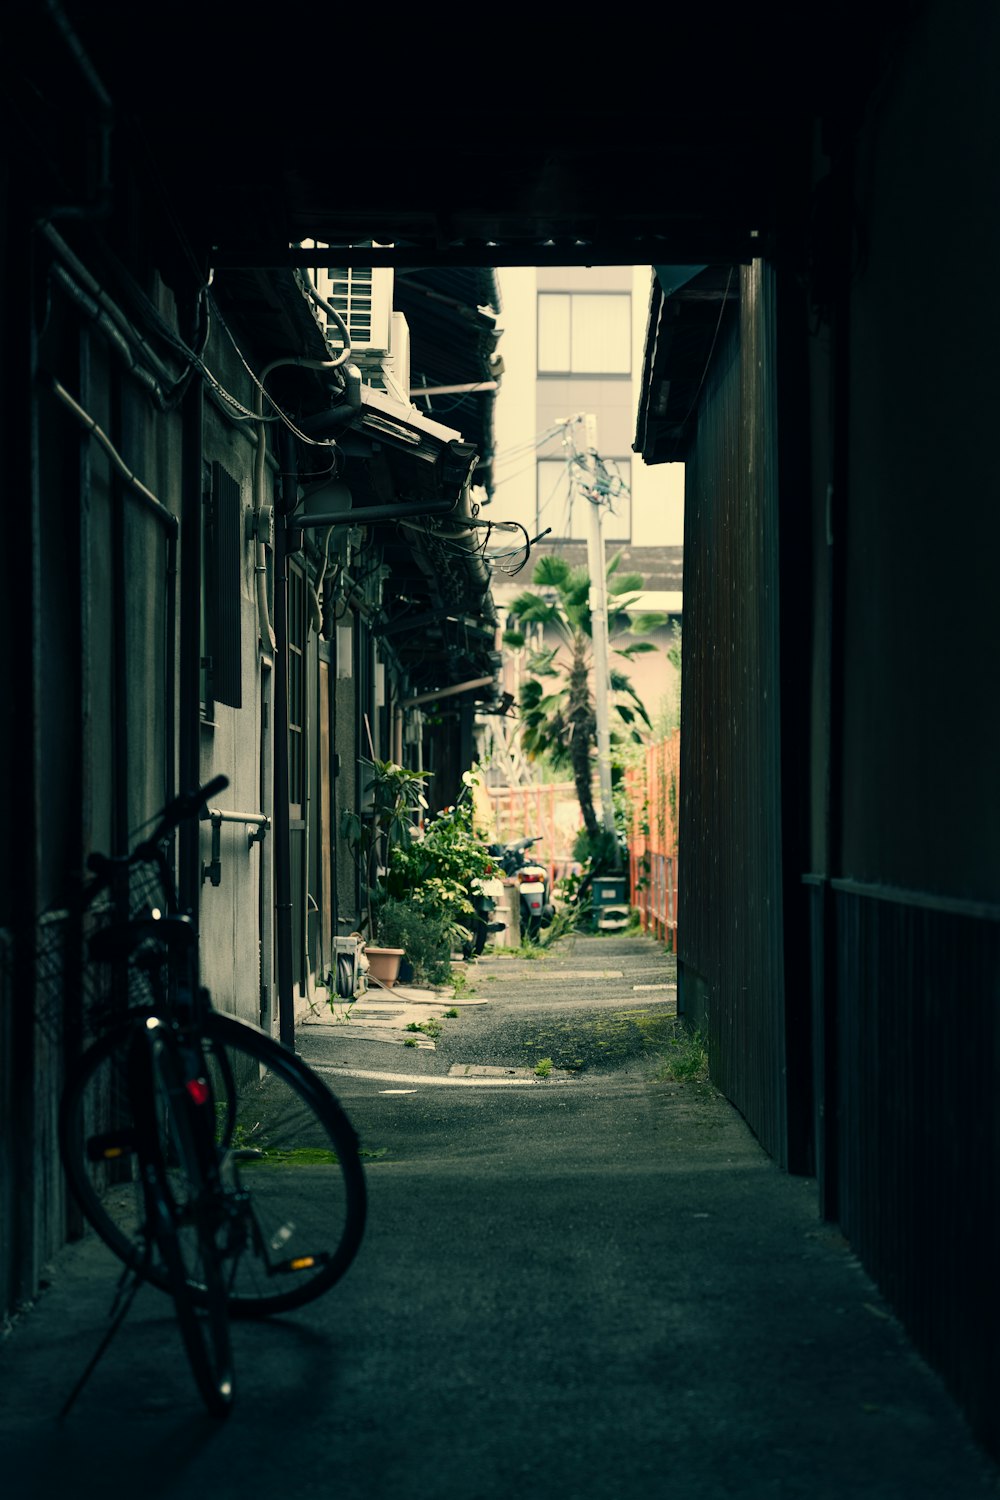 a bicycle parked in a alley